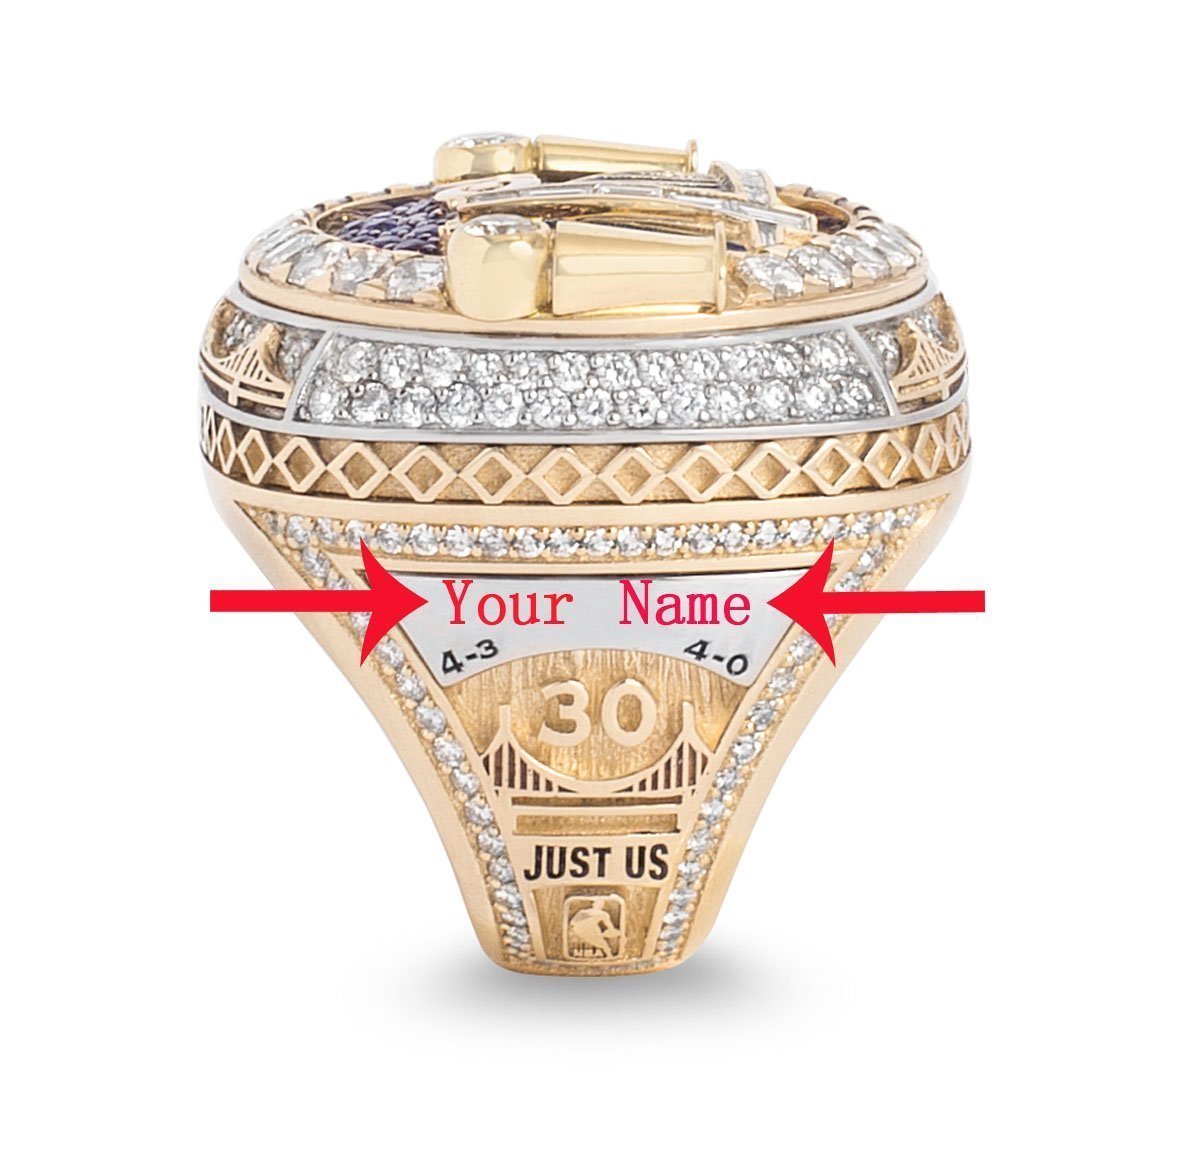 2018 super bowl ring cost